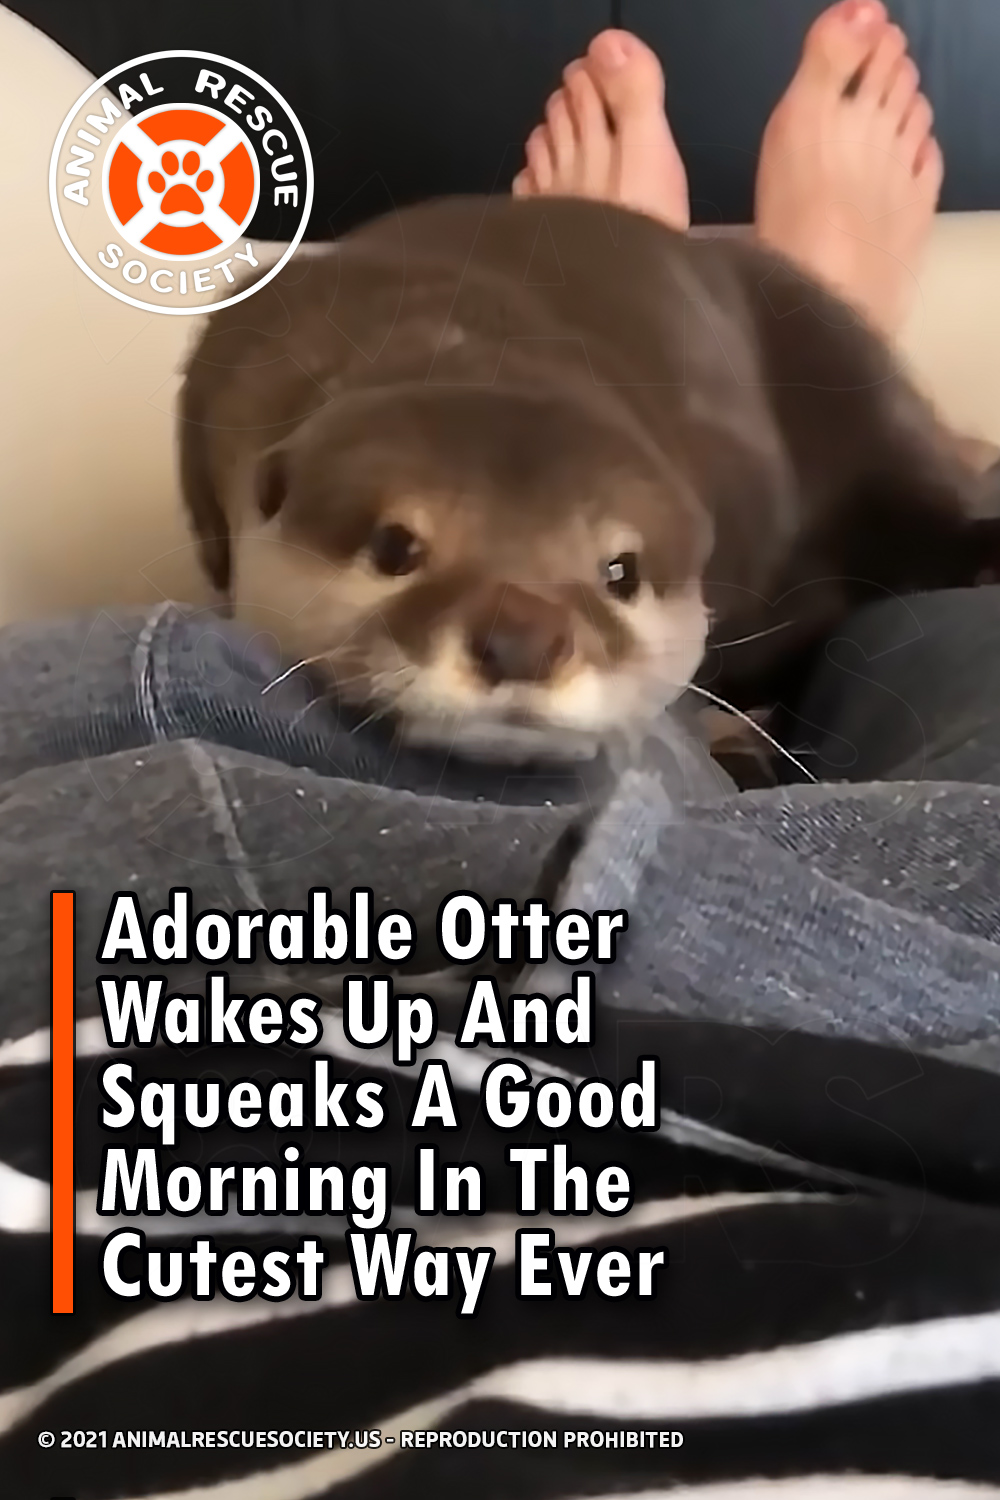 Adorable Otter Wakes Up And Squeaks A Good Morning In The Cutest Way Ever